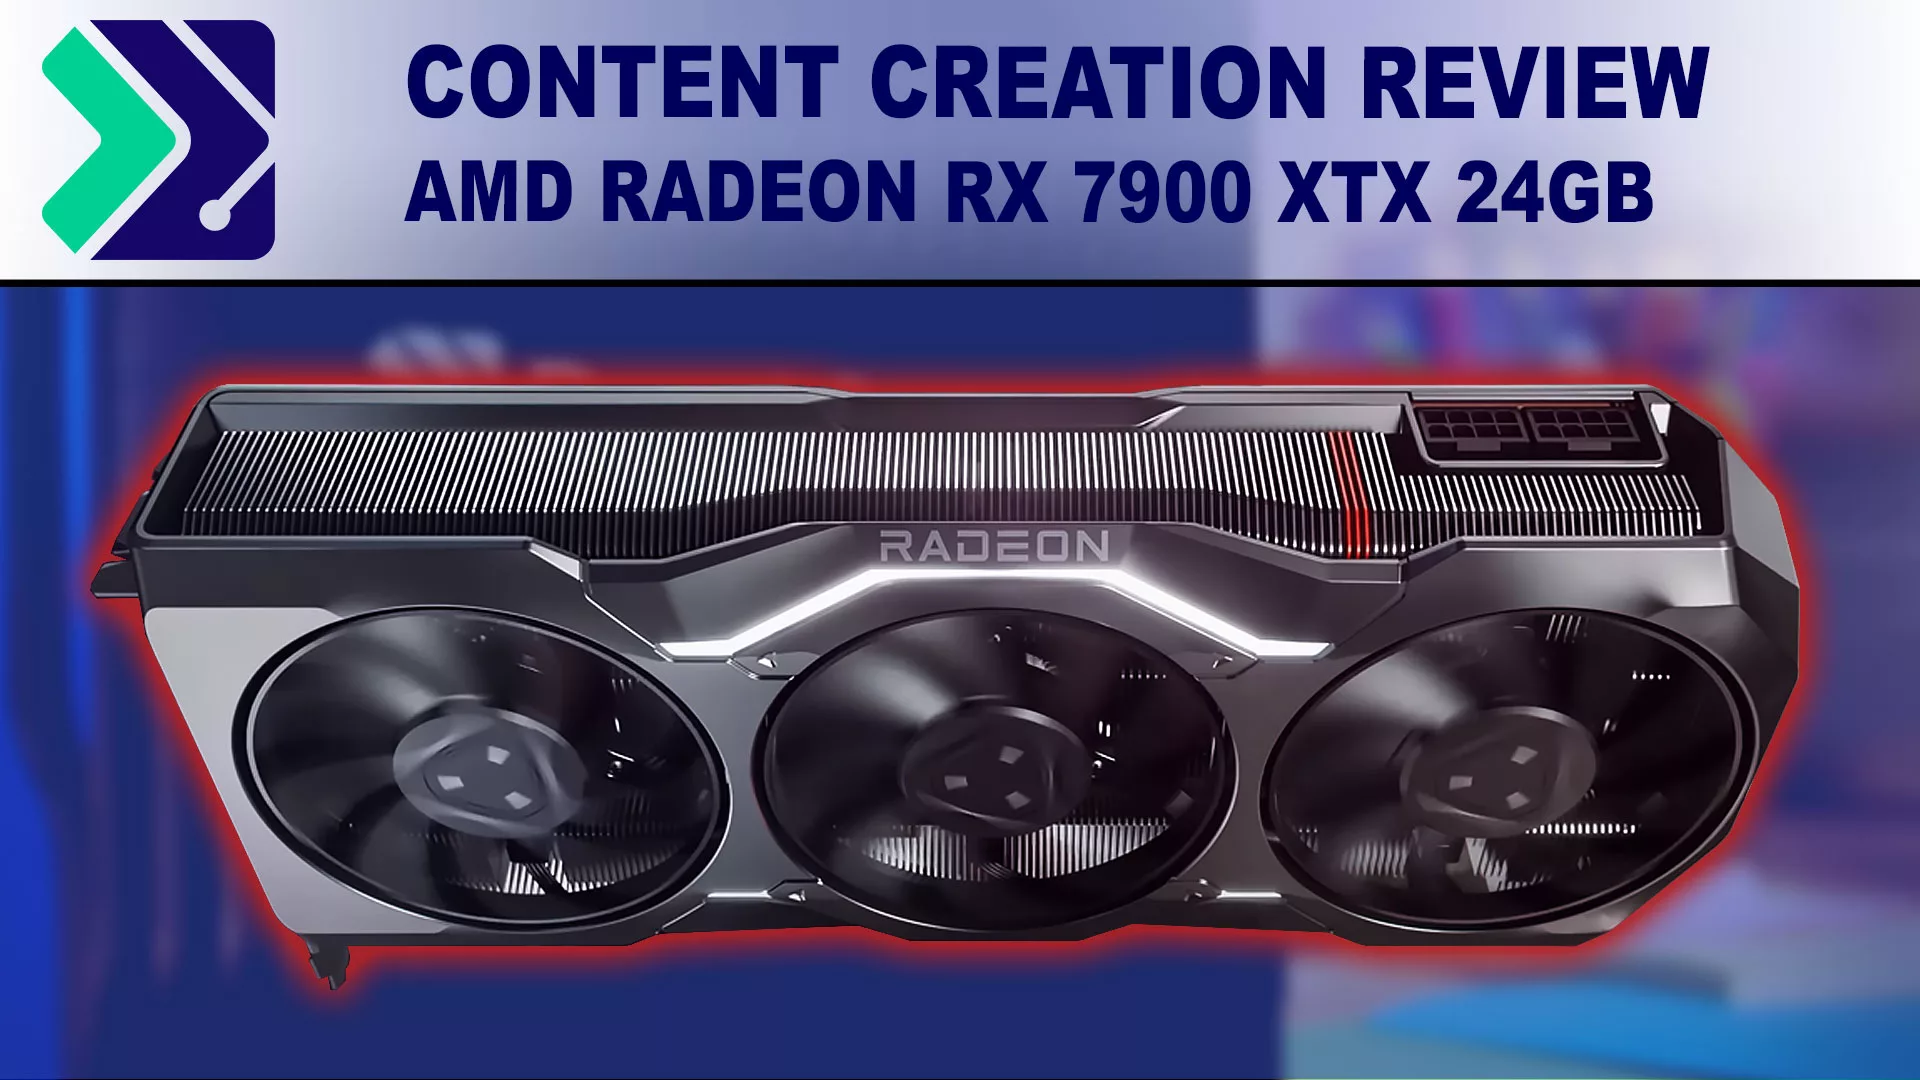 AMD Radeon RX 7900 XTX 24GB Content Creation Review Featured Image